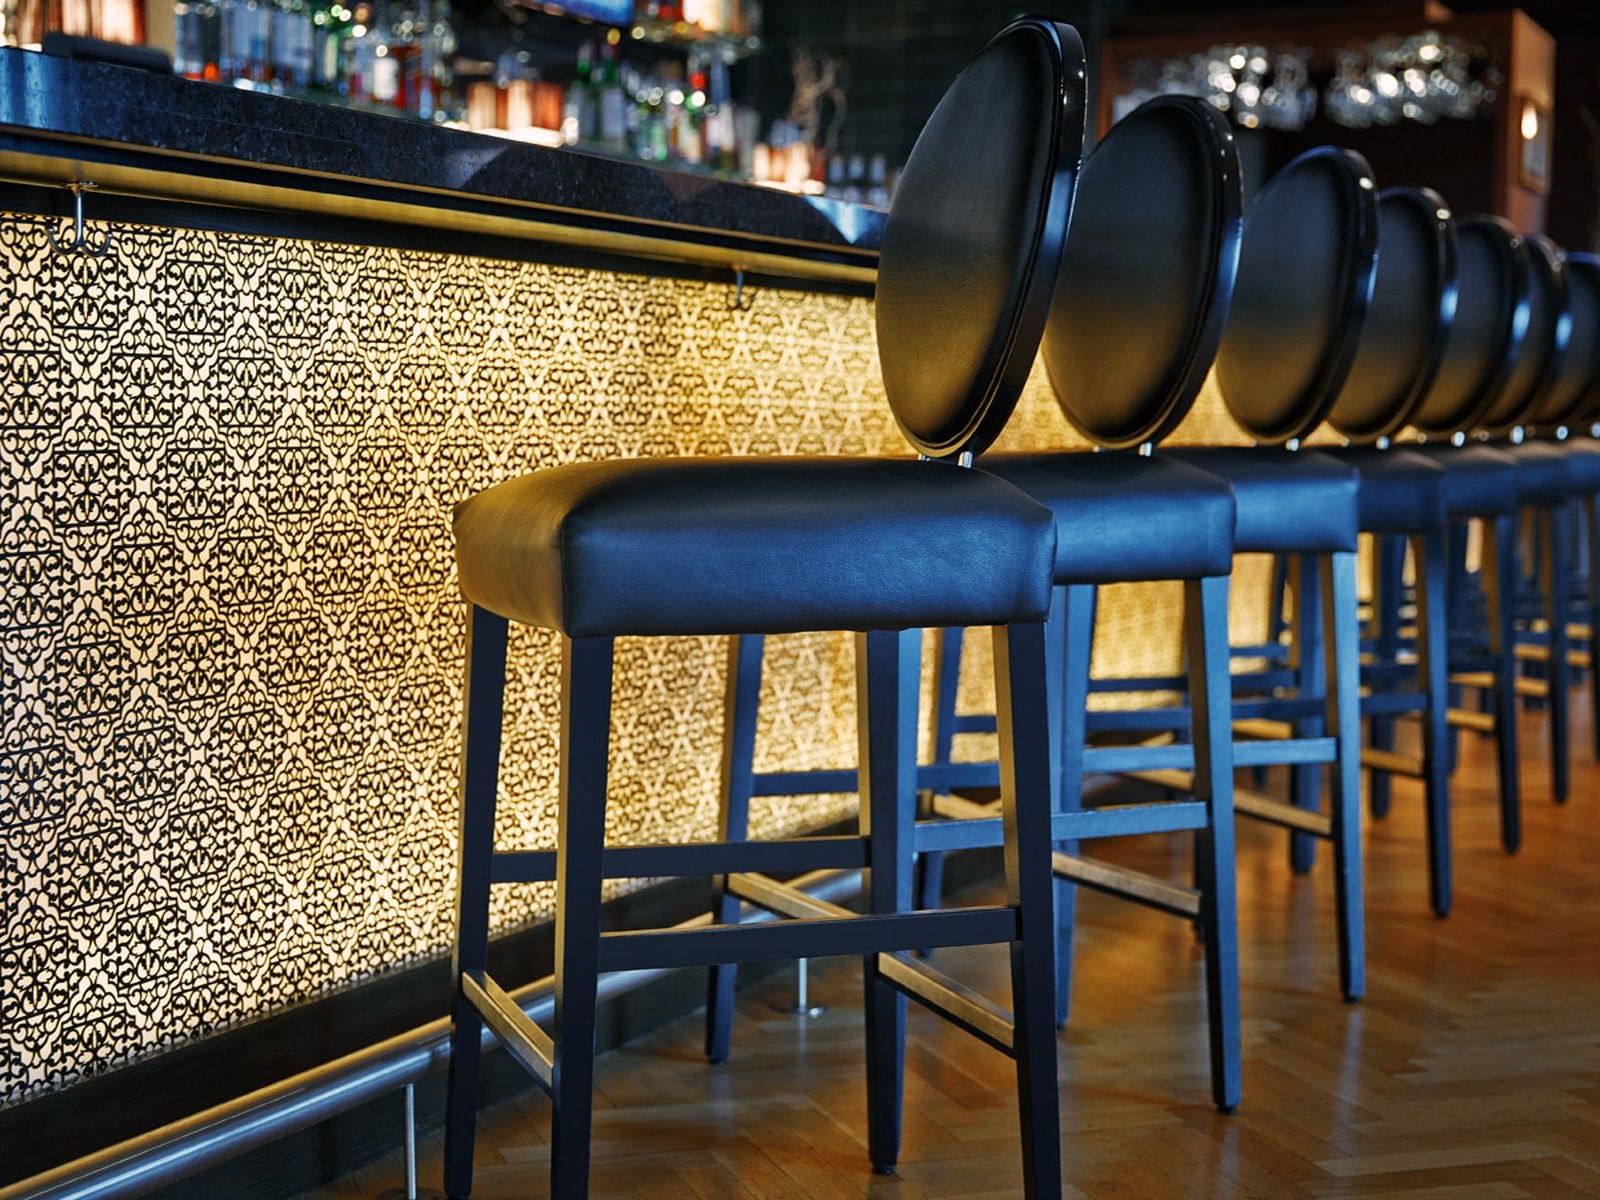 a row of chairs at a bar